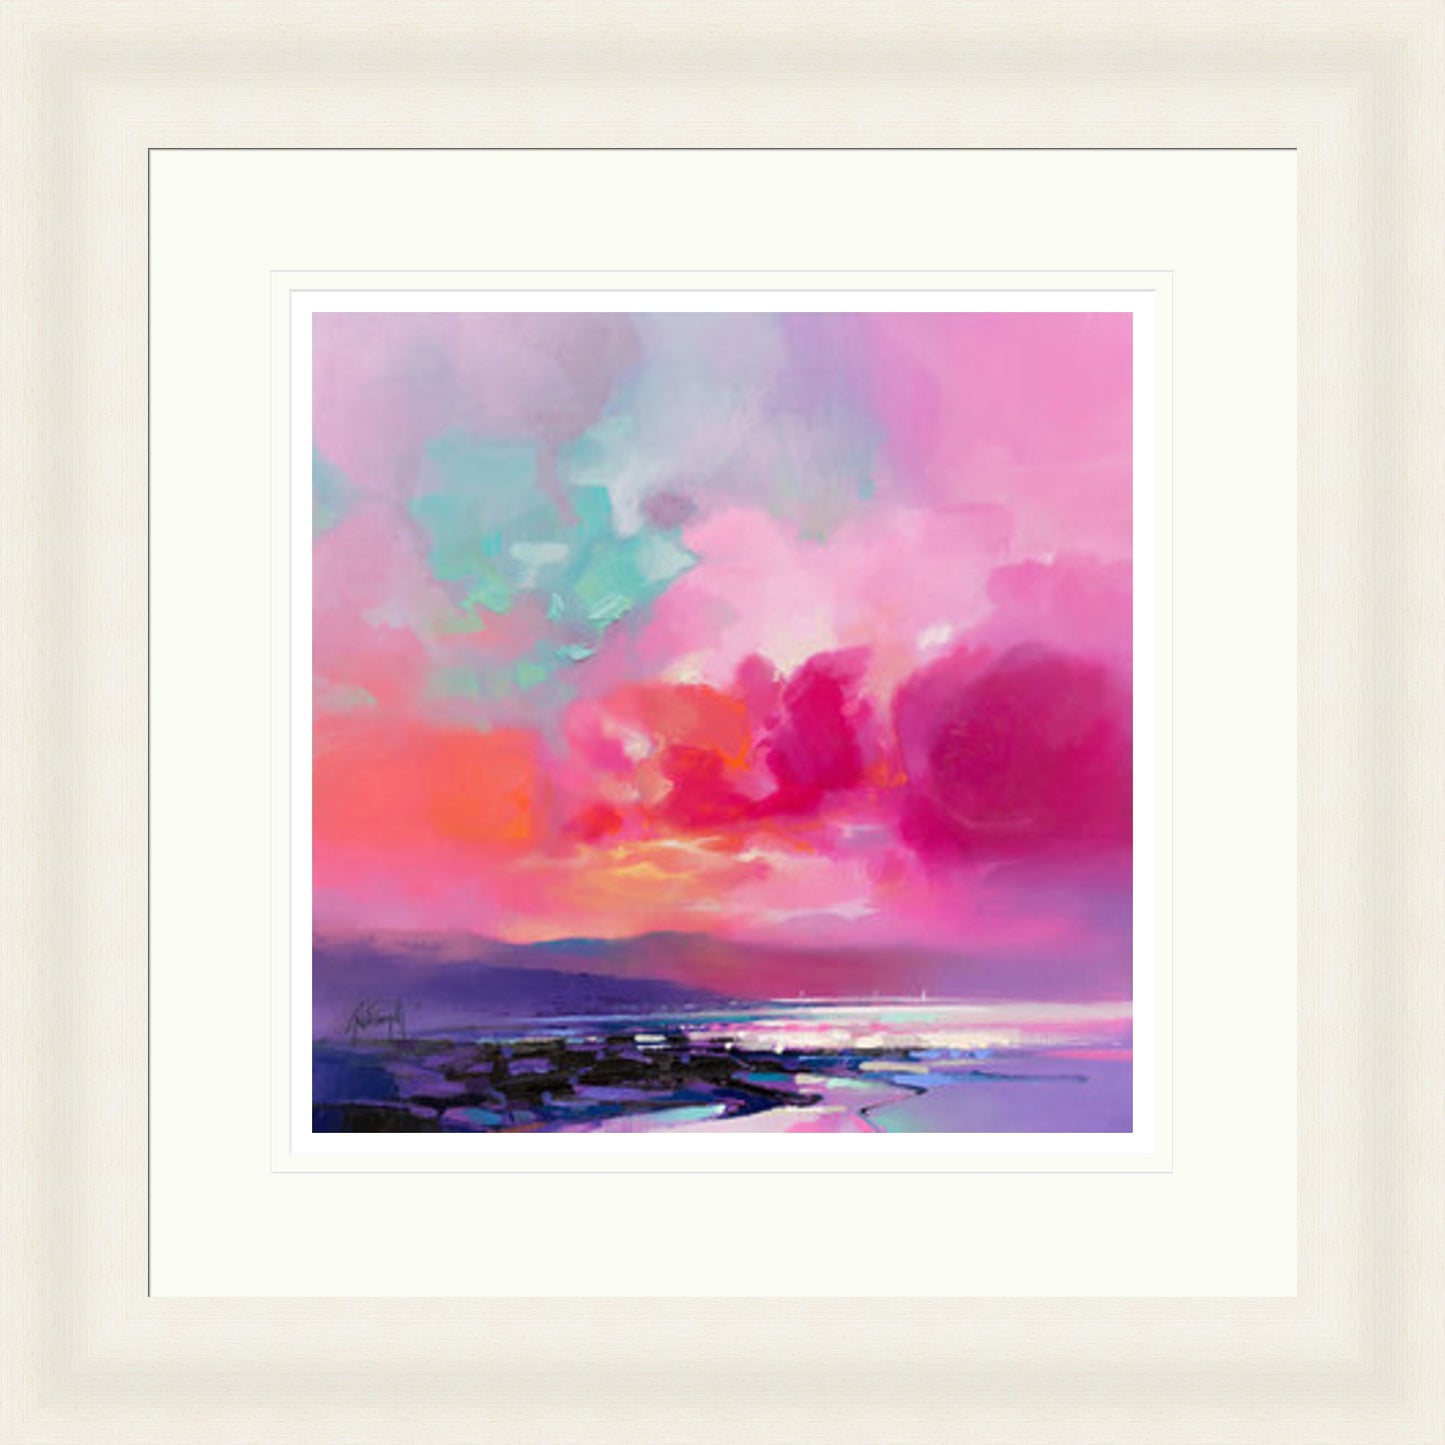 Loch Fyne Sailing (Signed & Numbered Limited Edition) by Scott Naismith